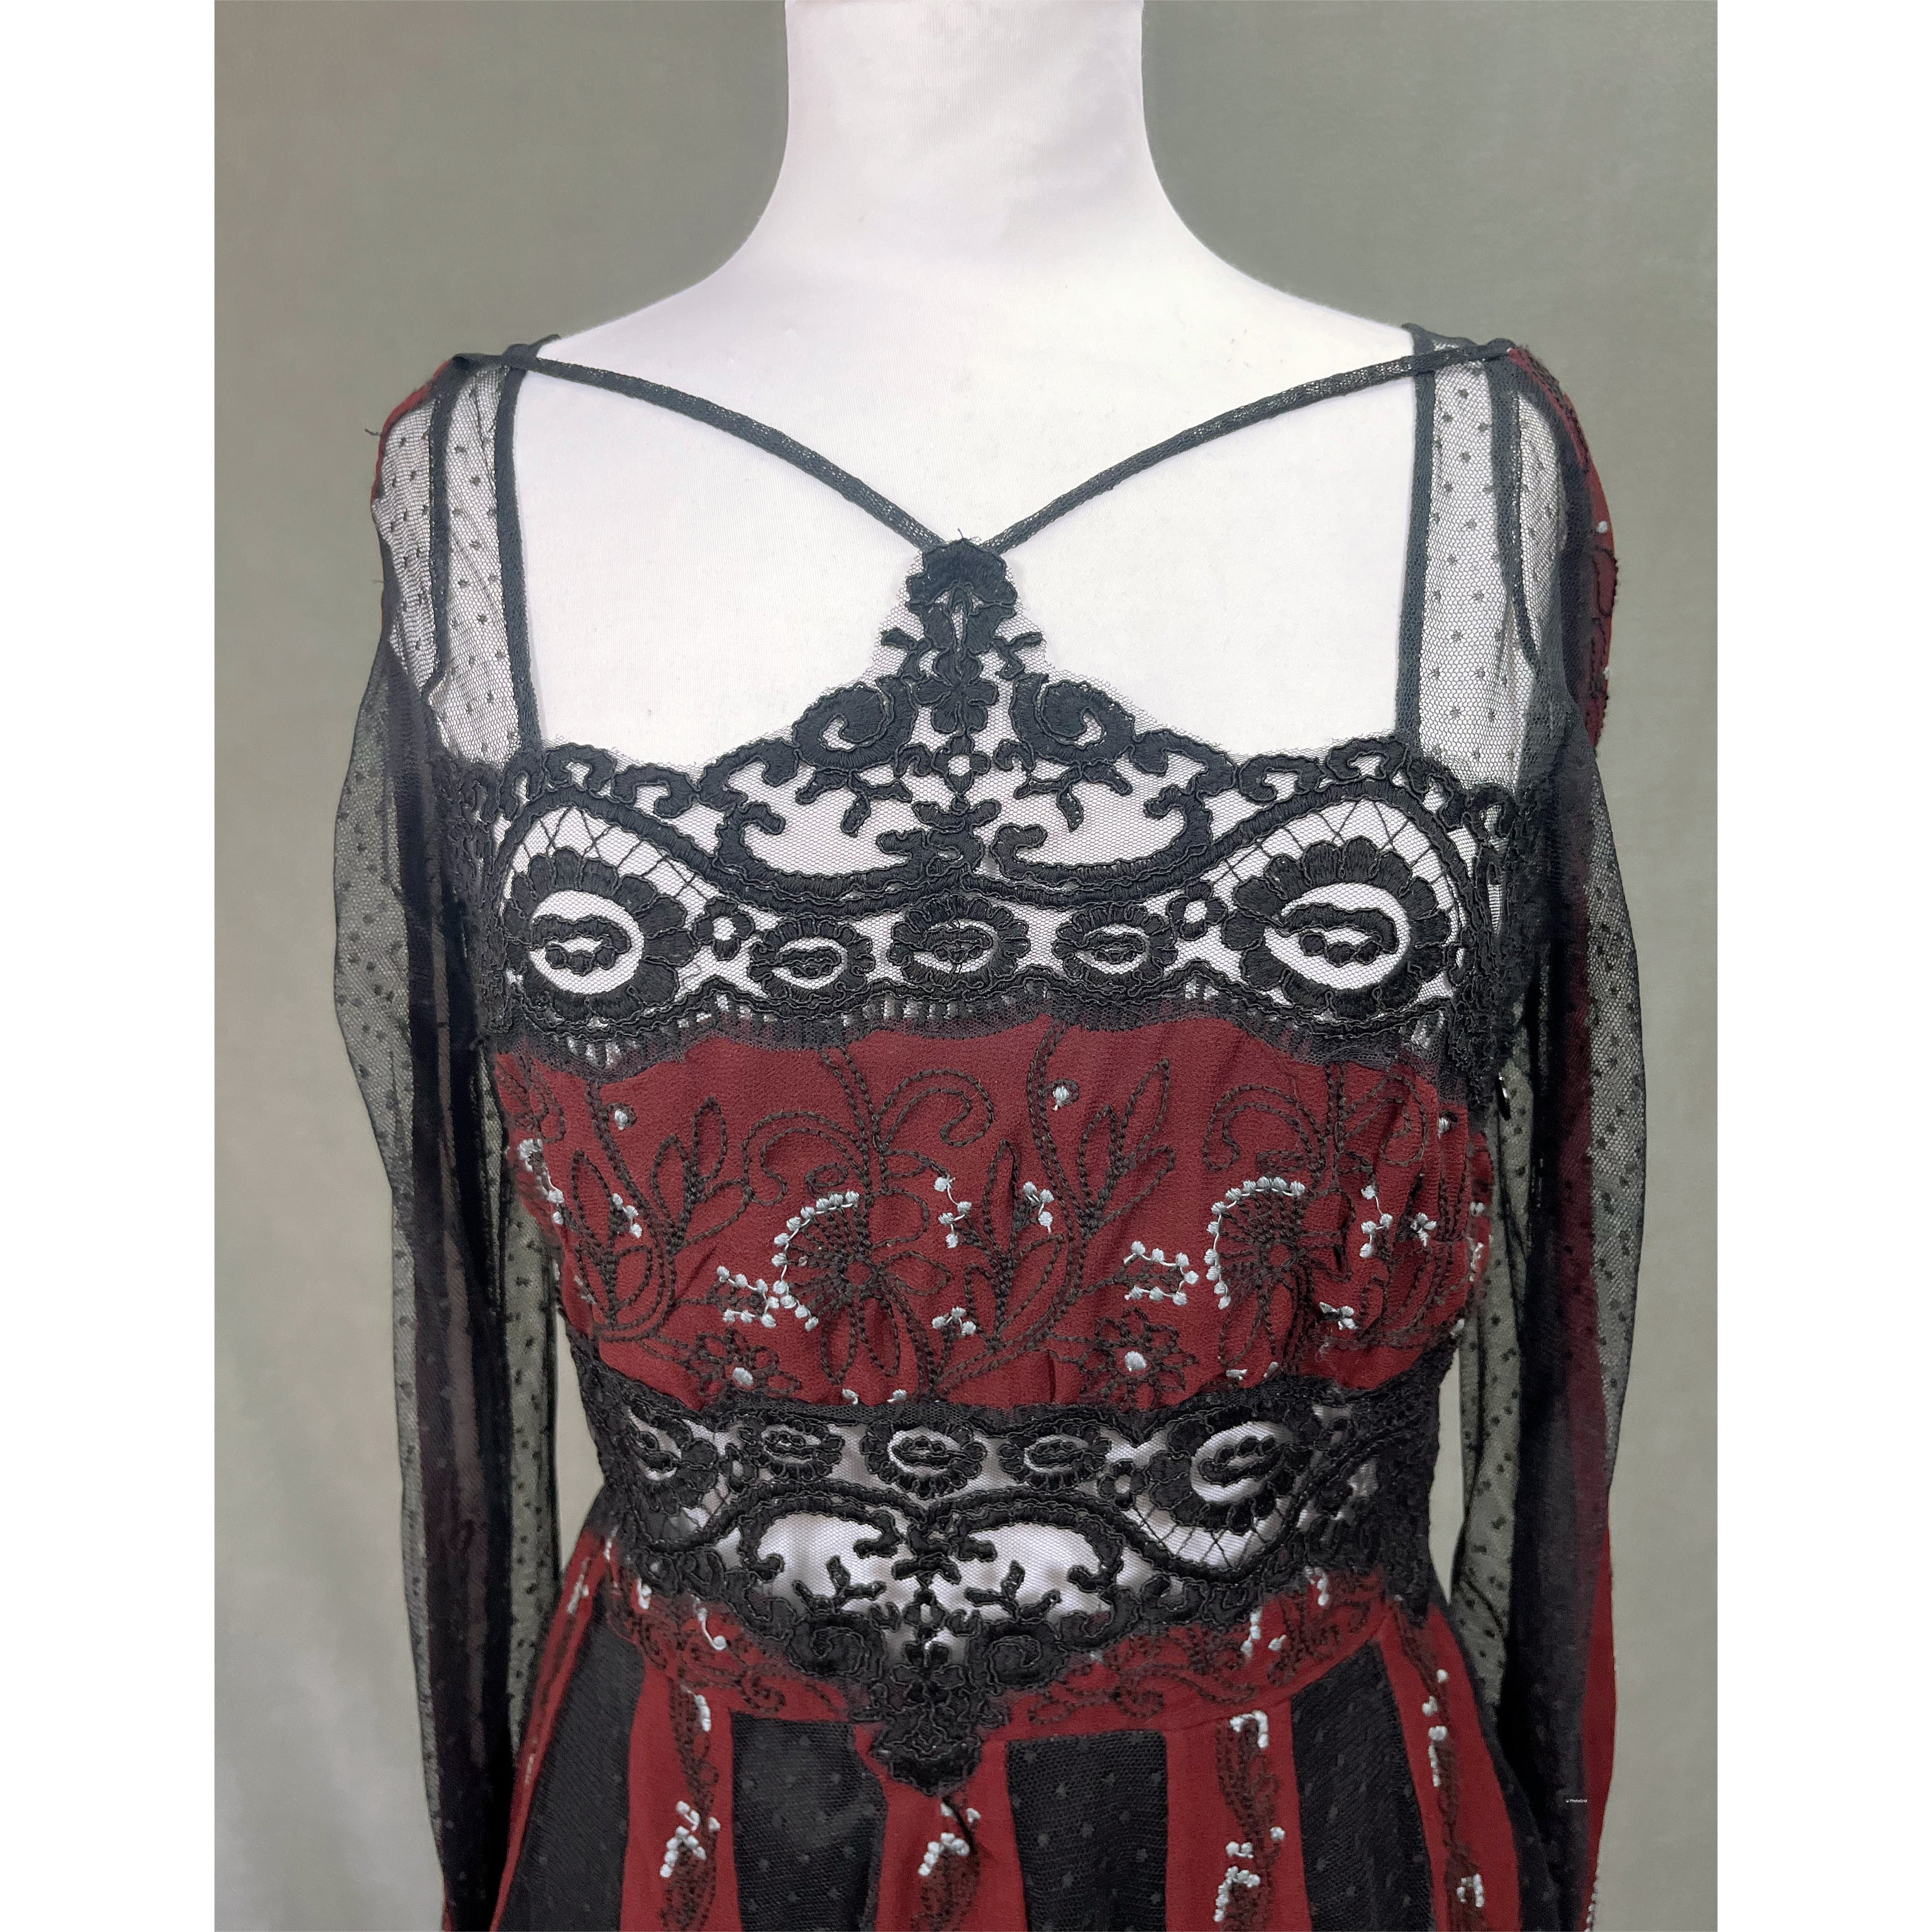 Free People black and wine dress, size 4